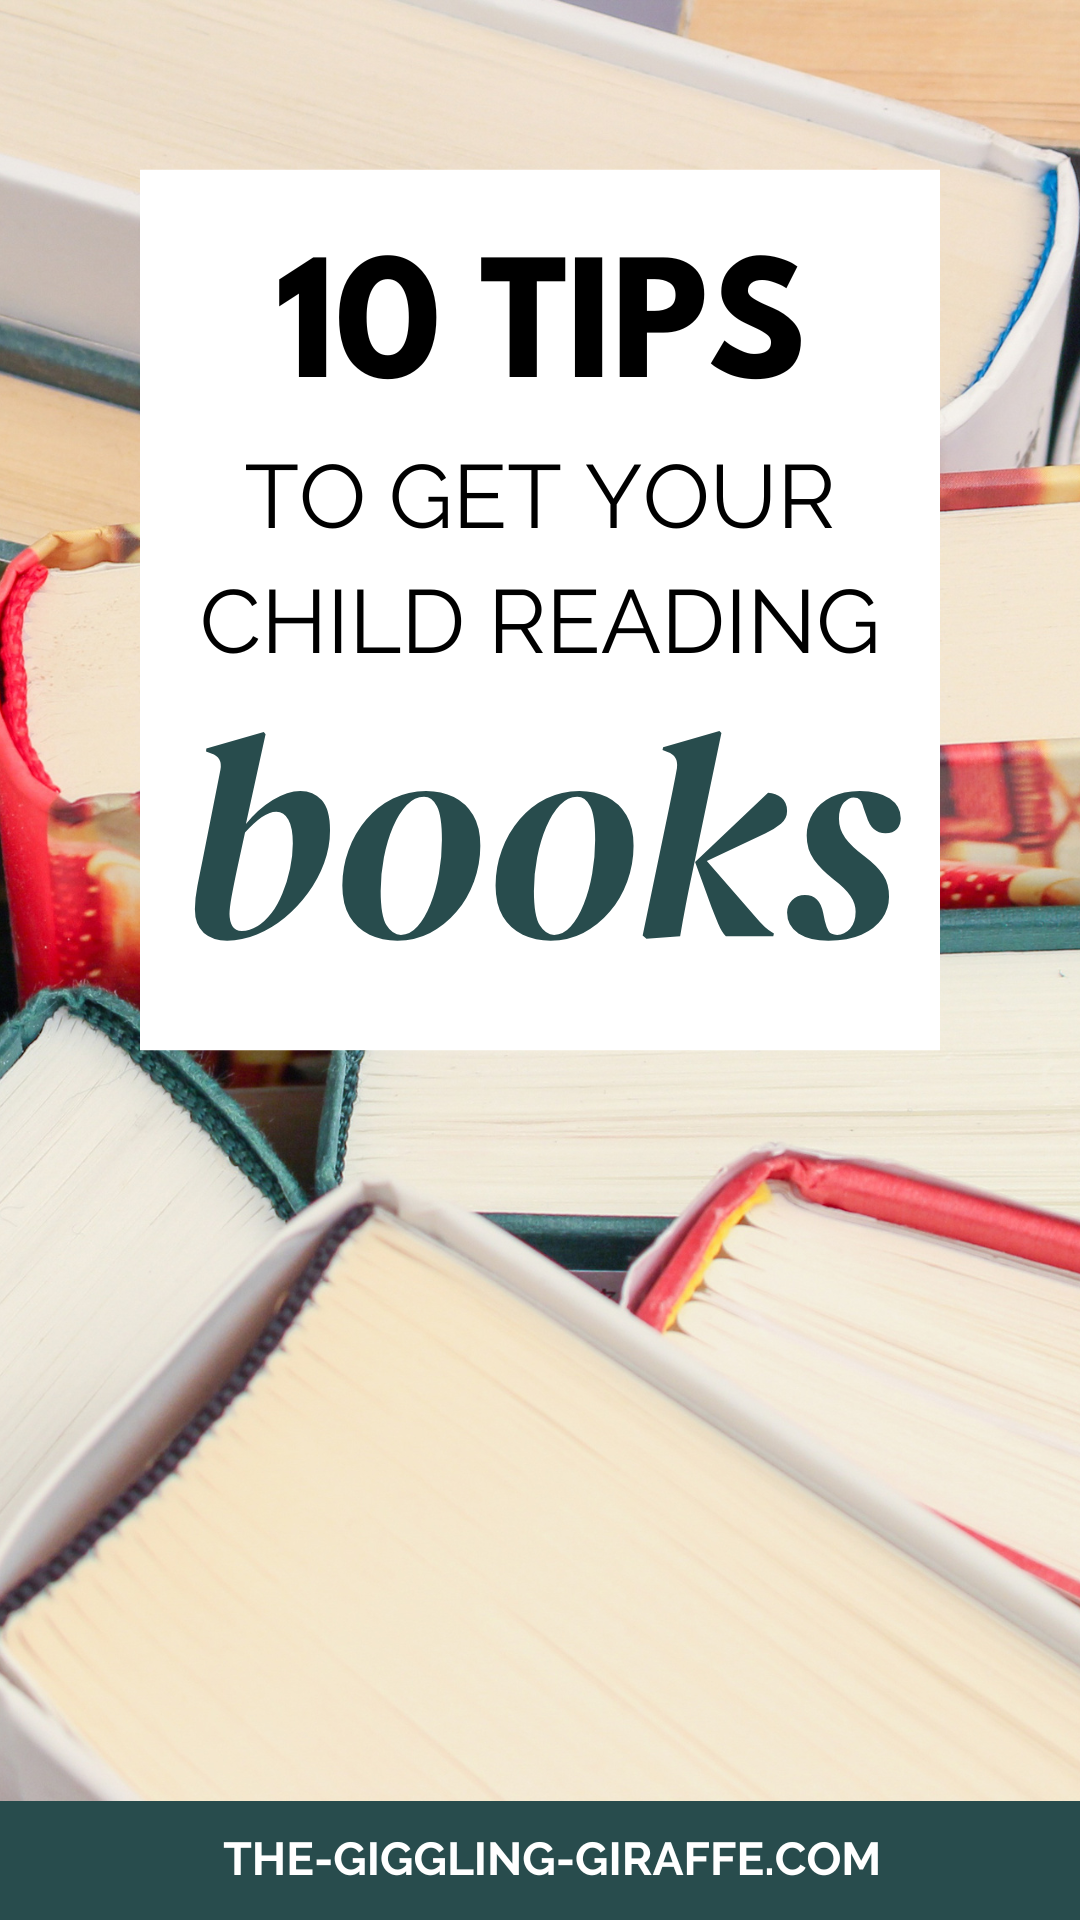 10 tips to get your child reading books